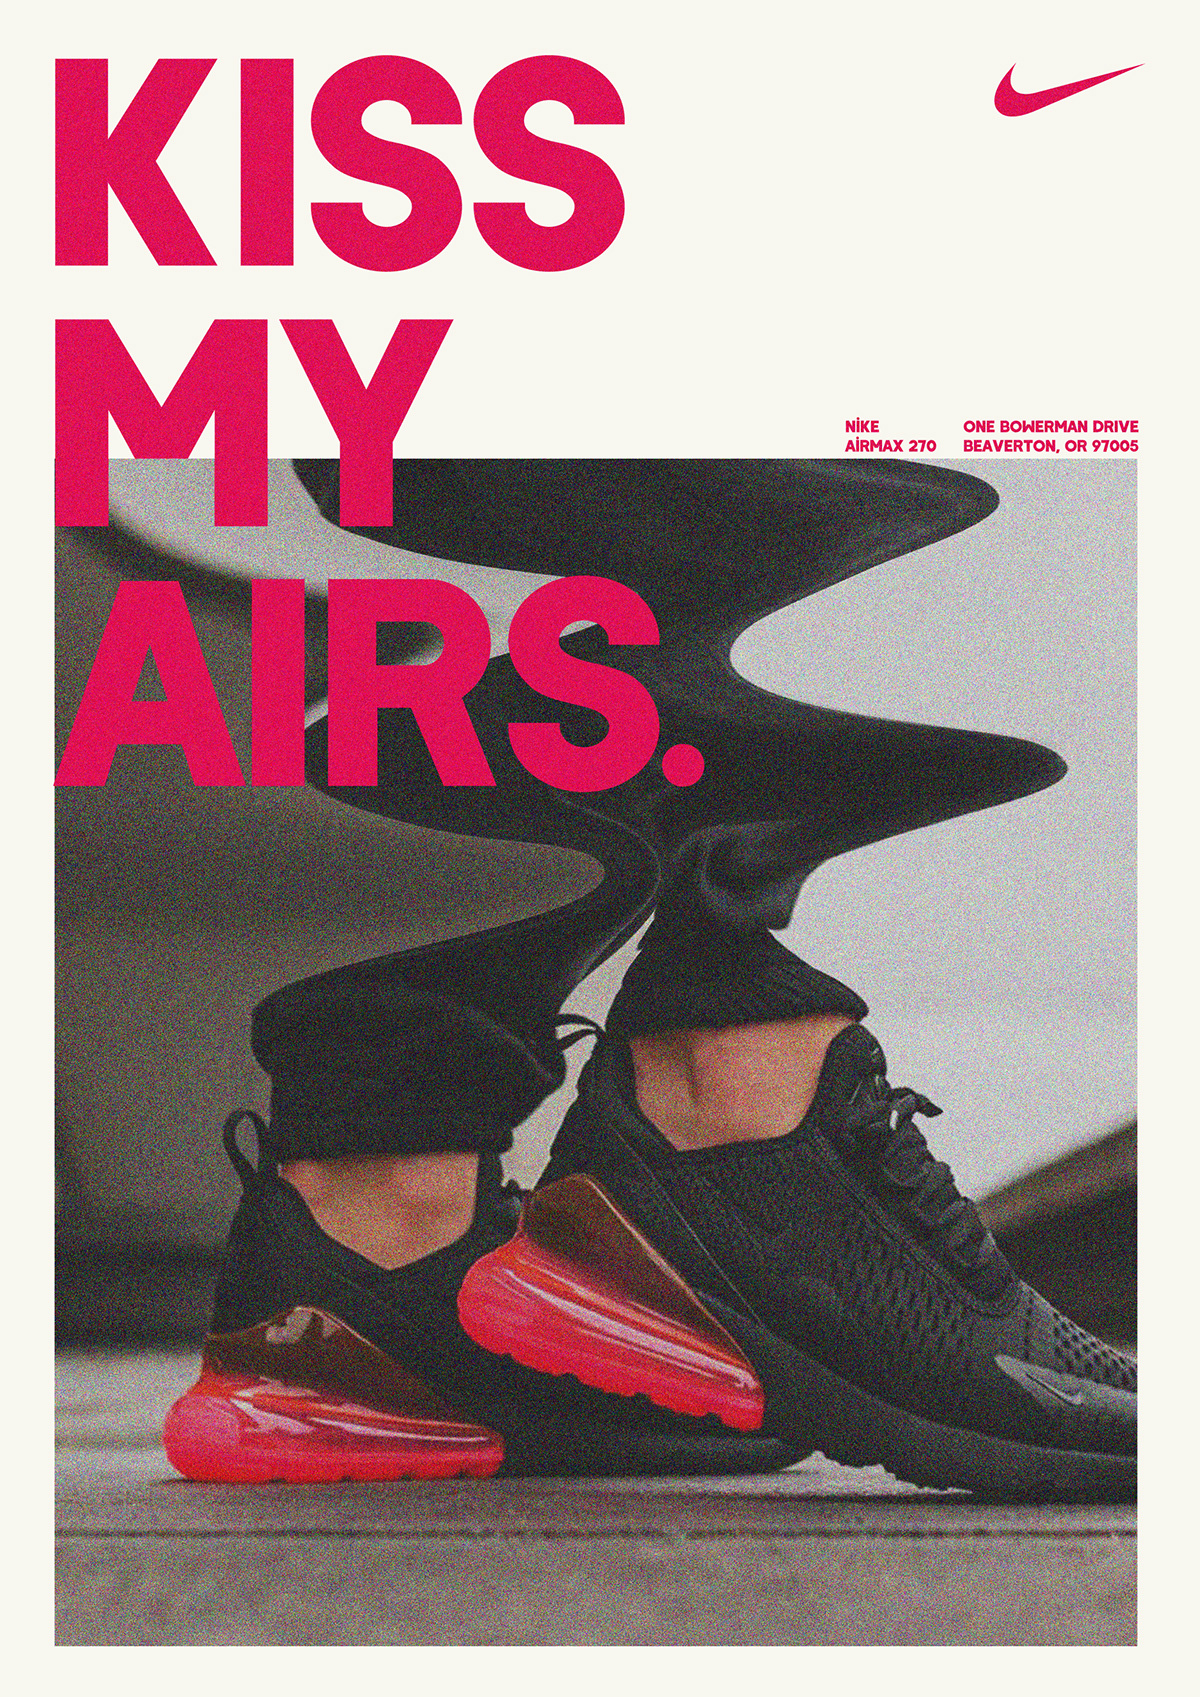 Nike AIRMAX 270 AD Campaign on Behance